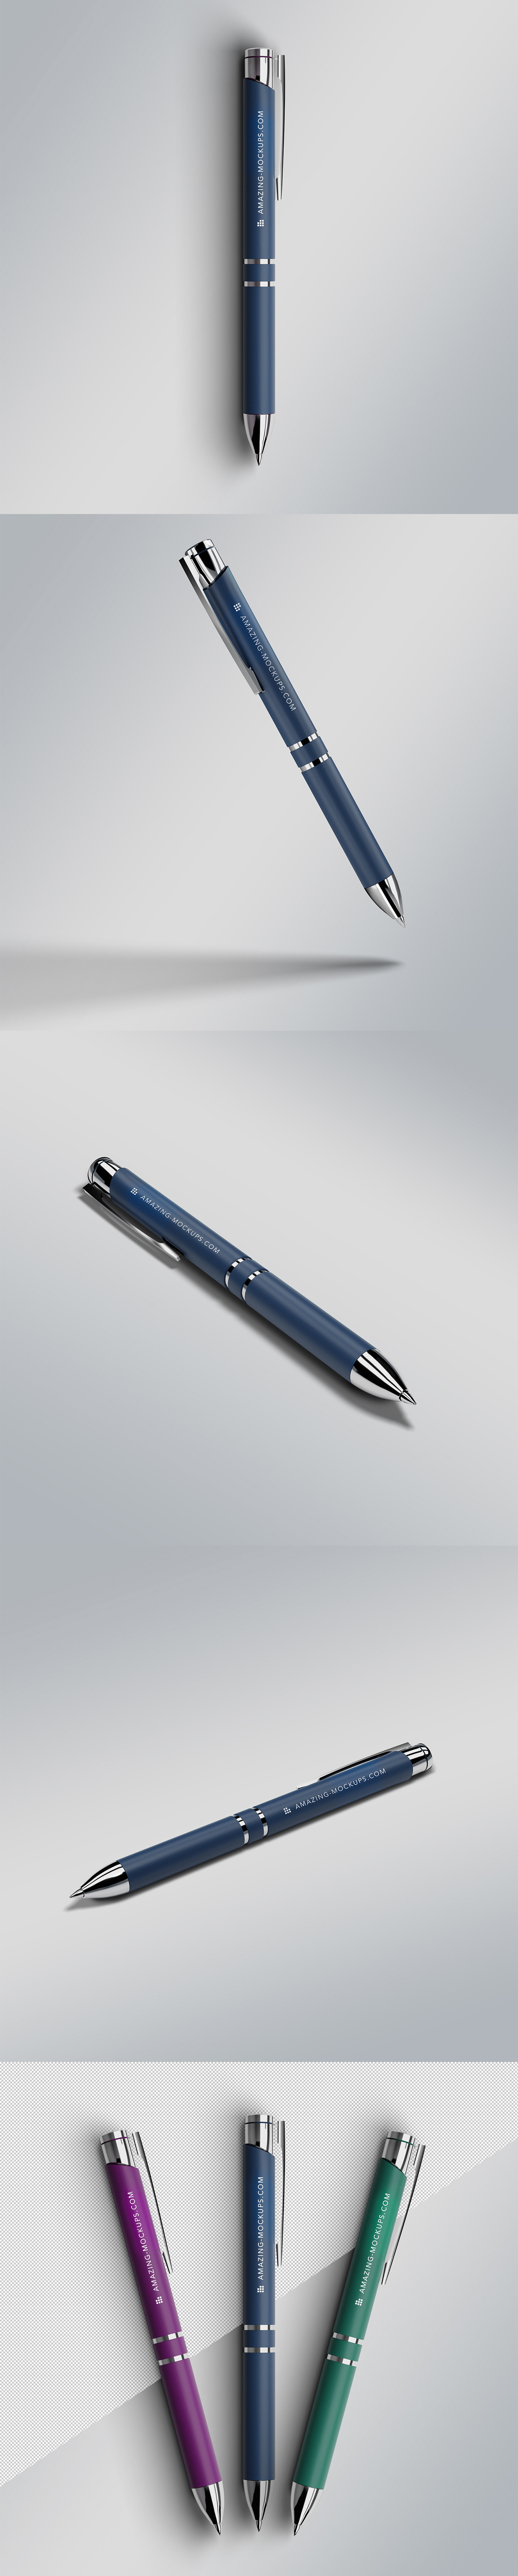 Free Ballpoint Pen Mockup Set is a professional and luxurious pen mockup.